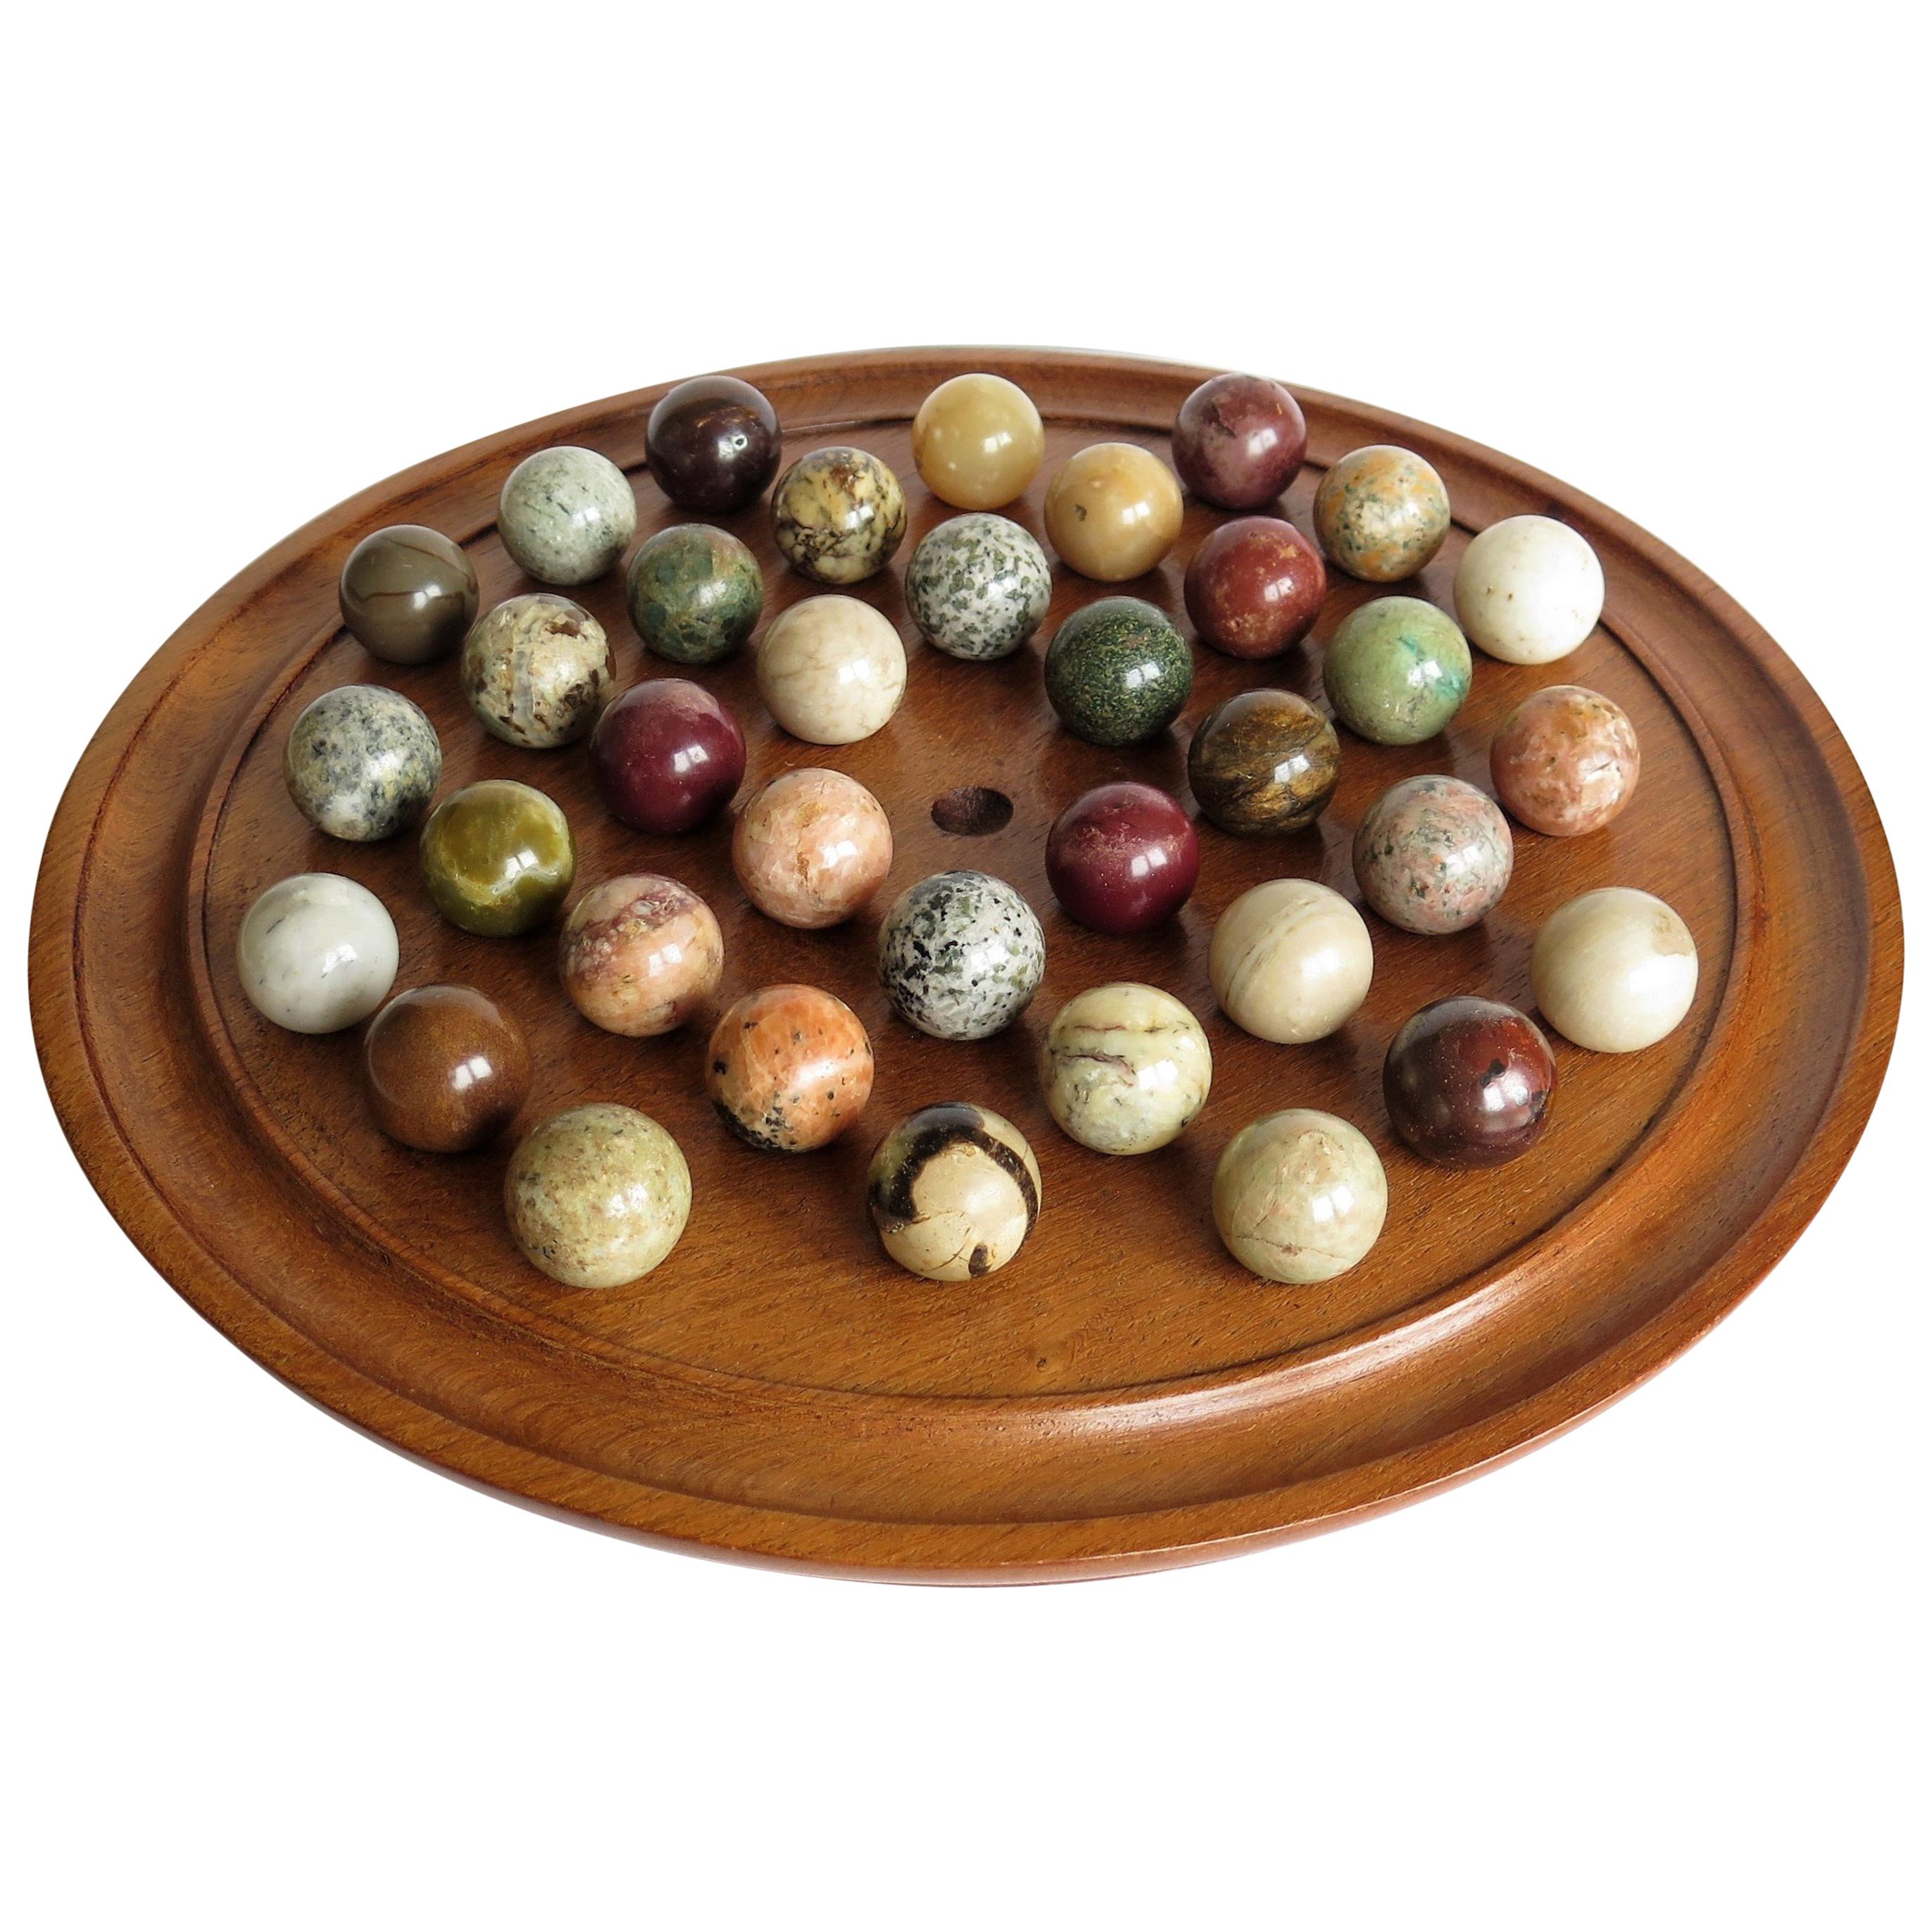 Fine Large Table Marble Solitaire Game with 36 Agate Marbles, Late 19th Century